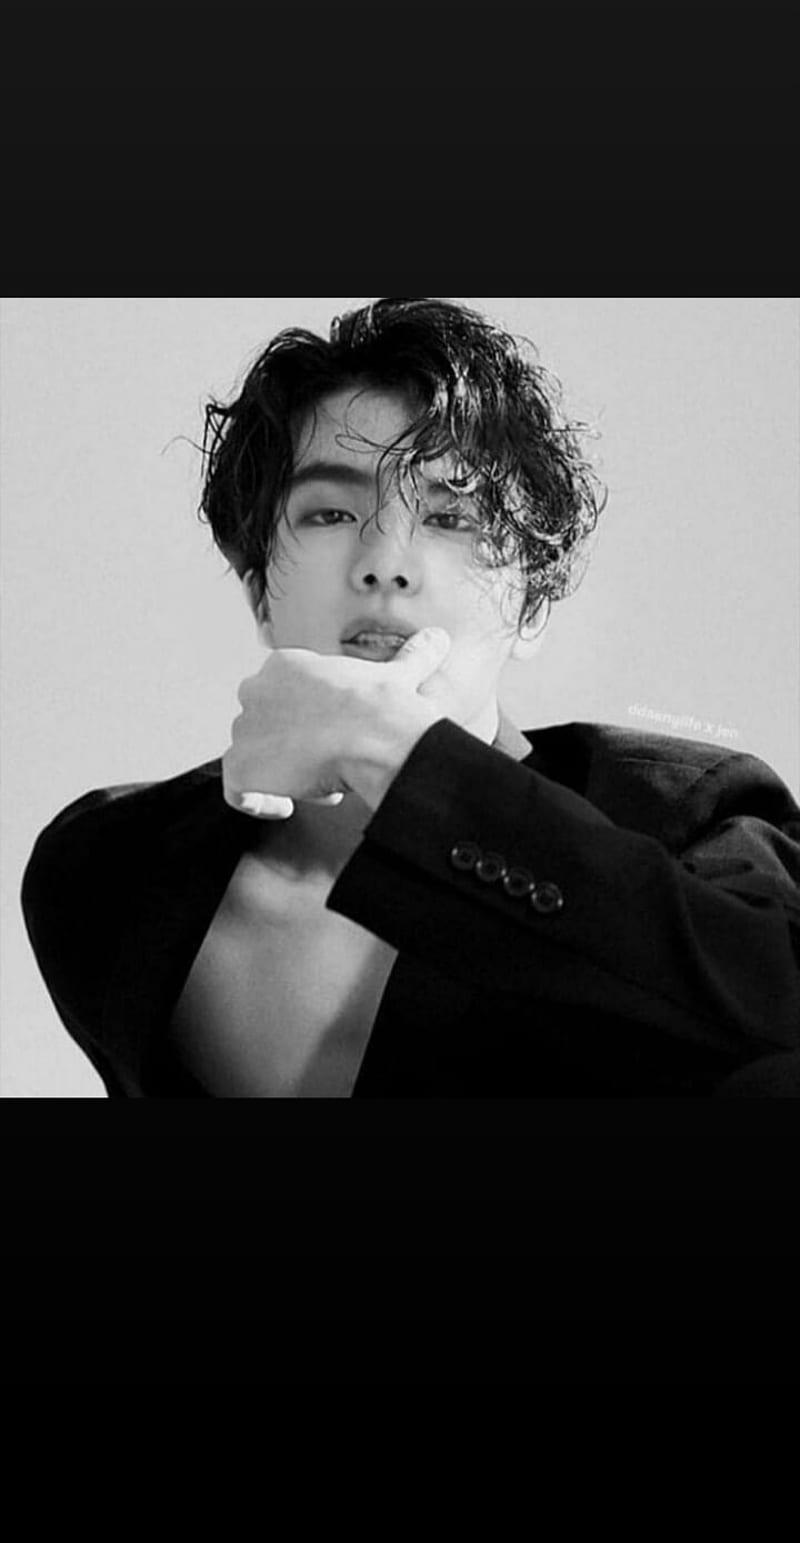 BTS Jin Captures Hearts With New Black & White Photo